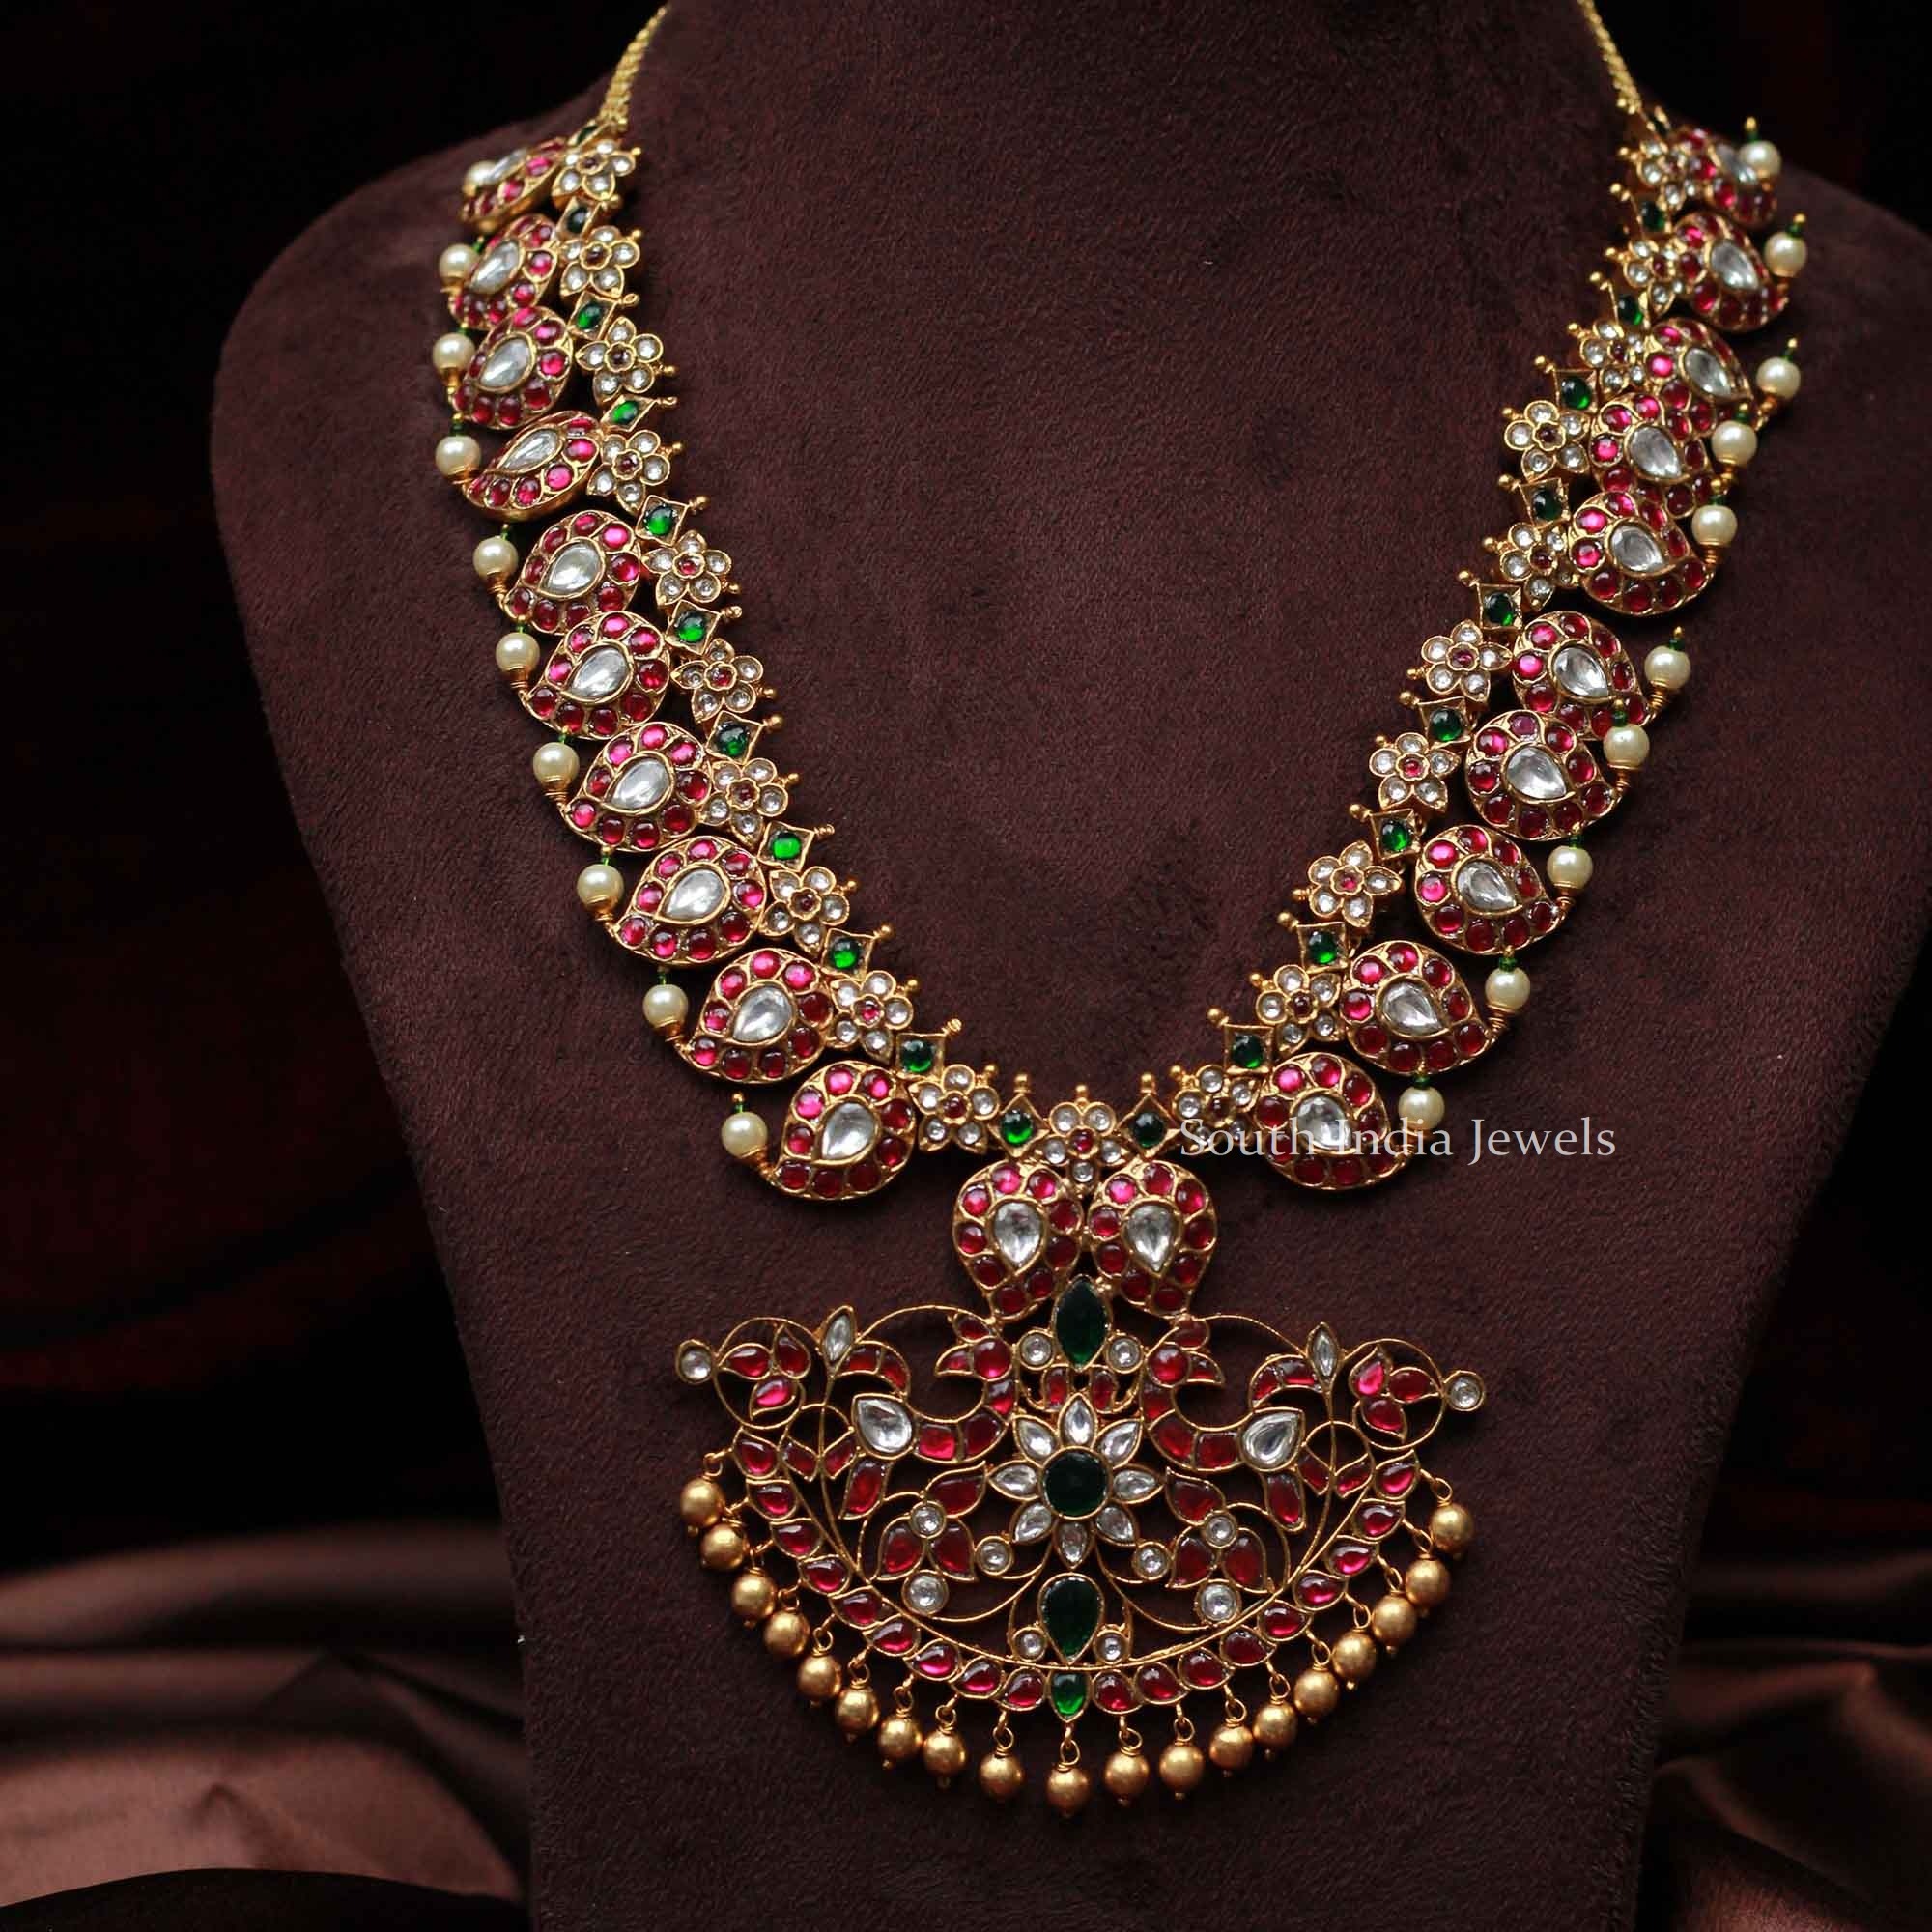 Traditional Mango Necklace - South India Jewels - Necklace